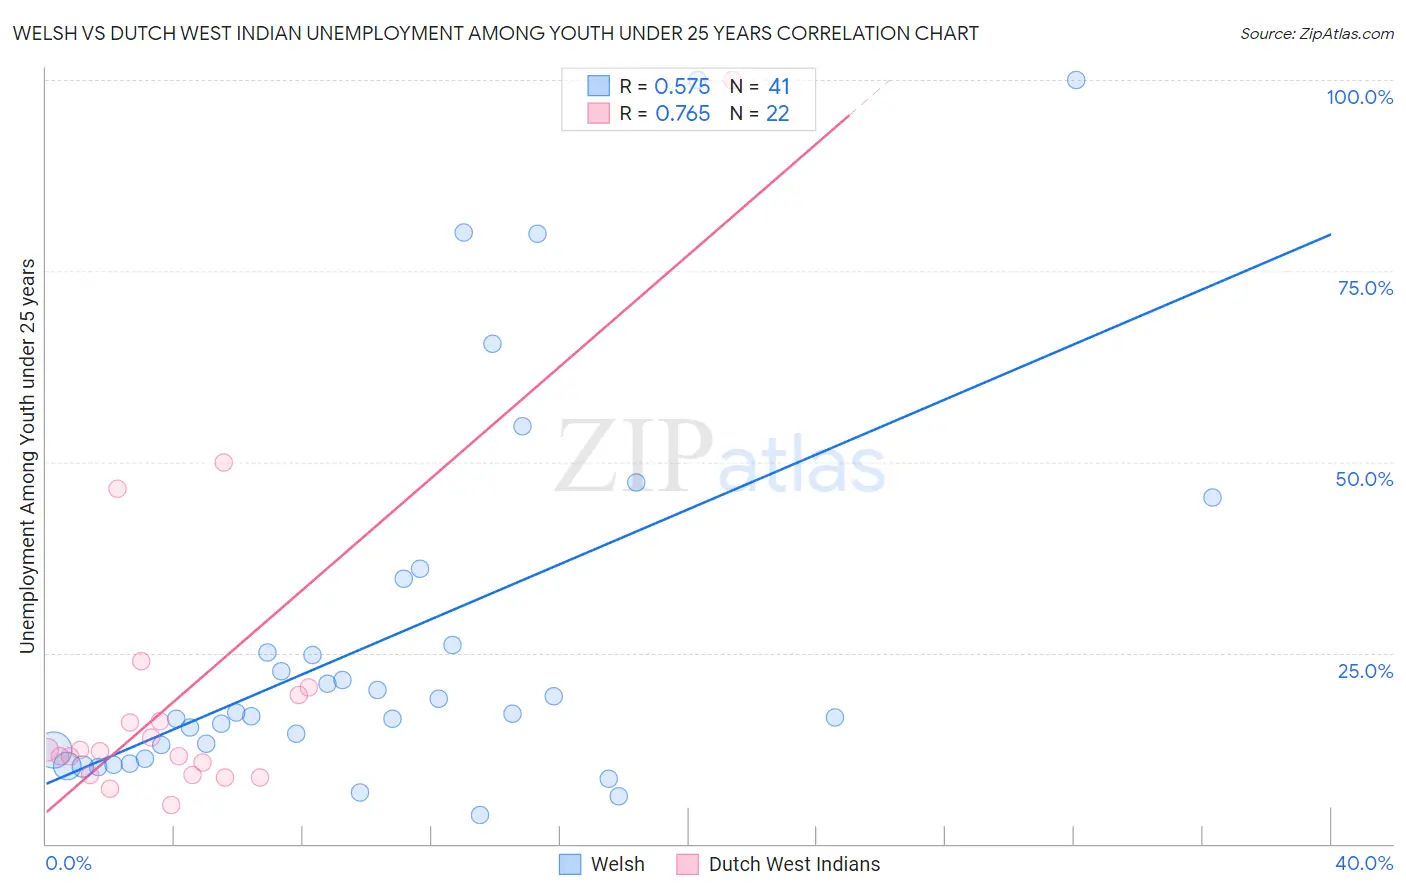 Welsh vs Dutch West Indian Unemployment Among Youth under 25 years